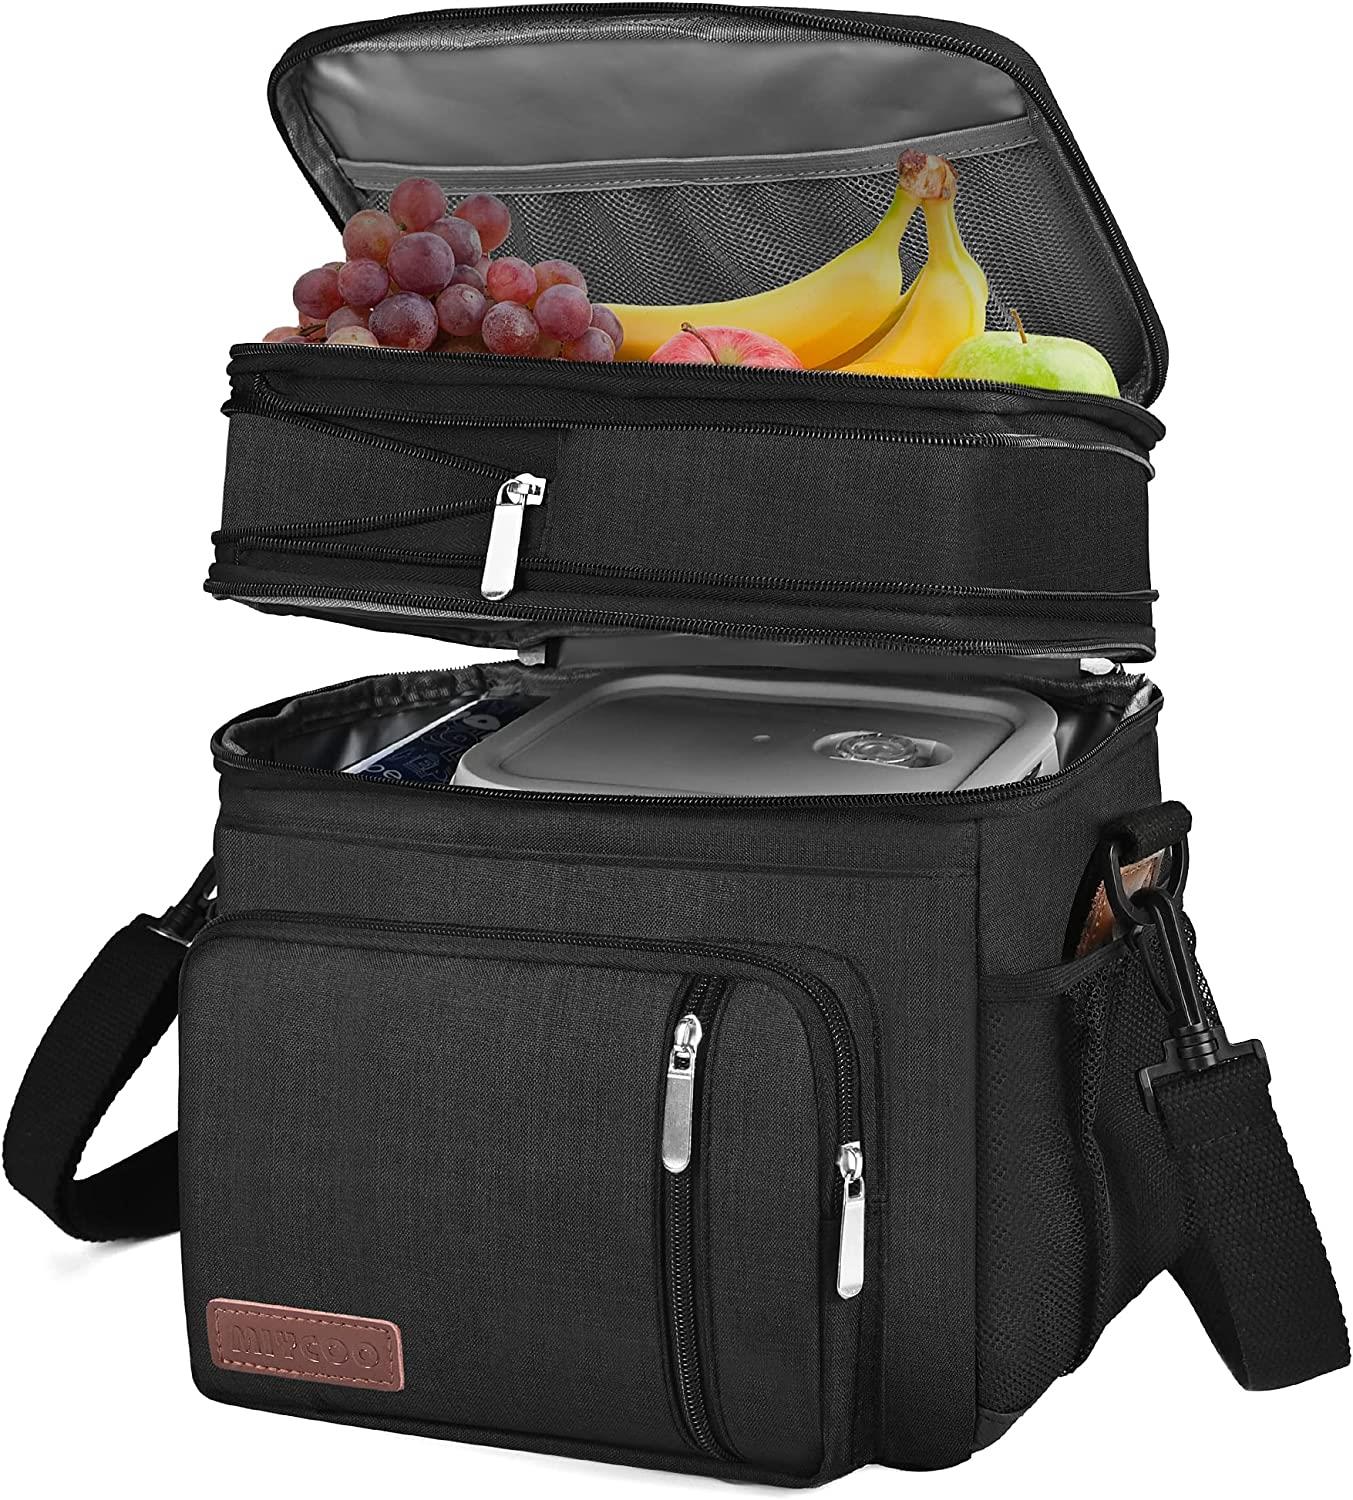 Expandable Lunch Cooler Bag